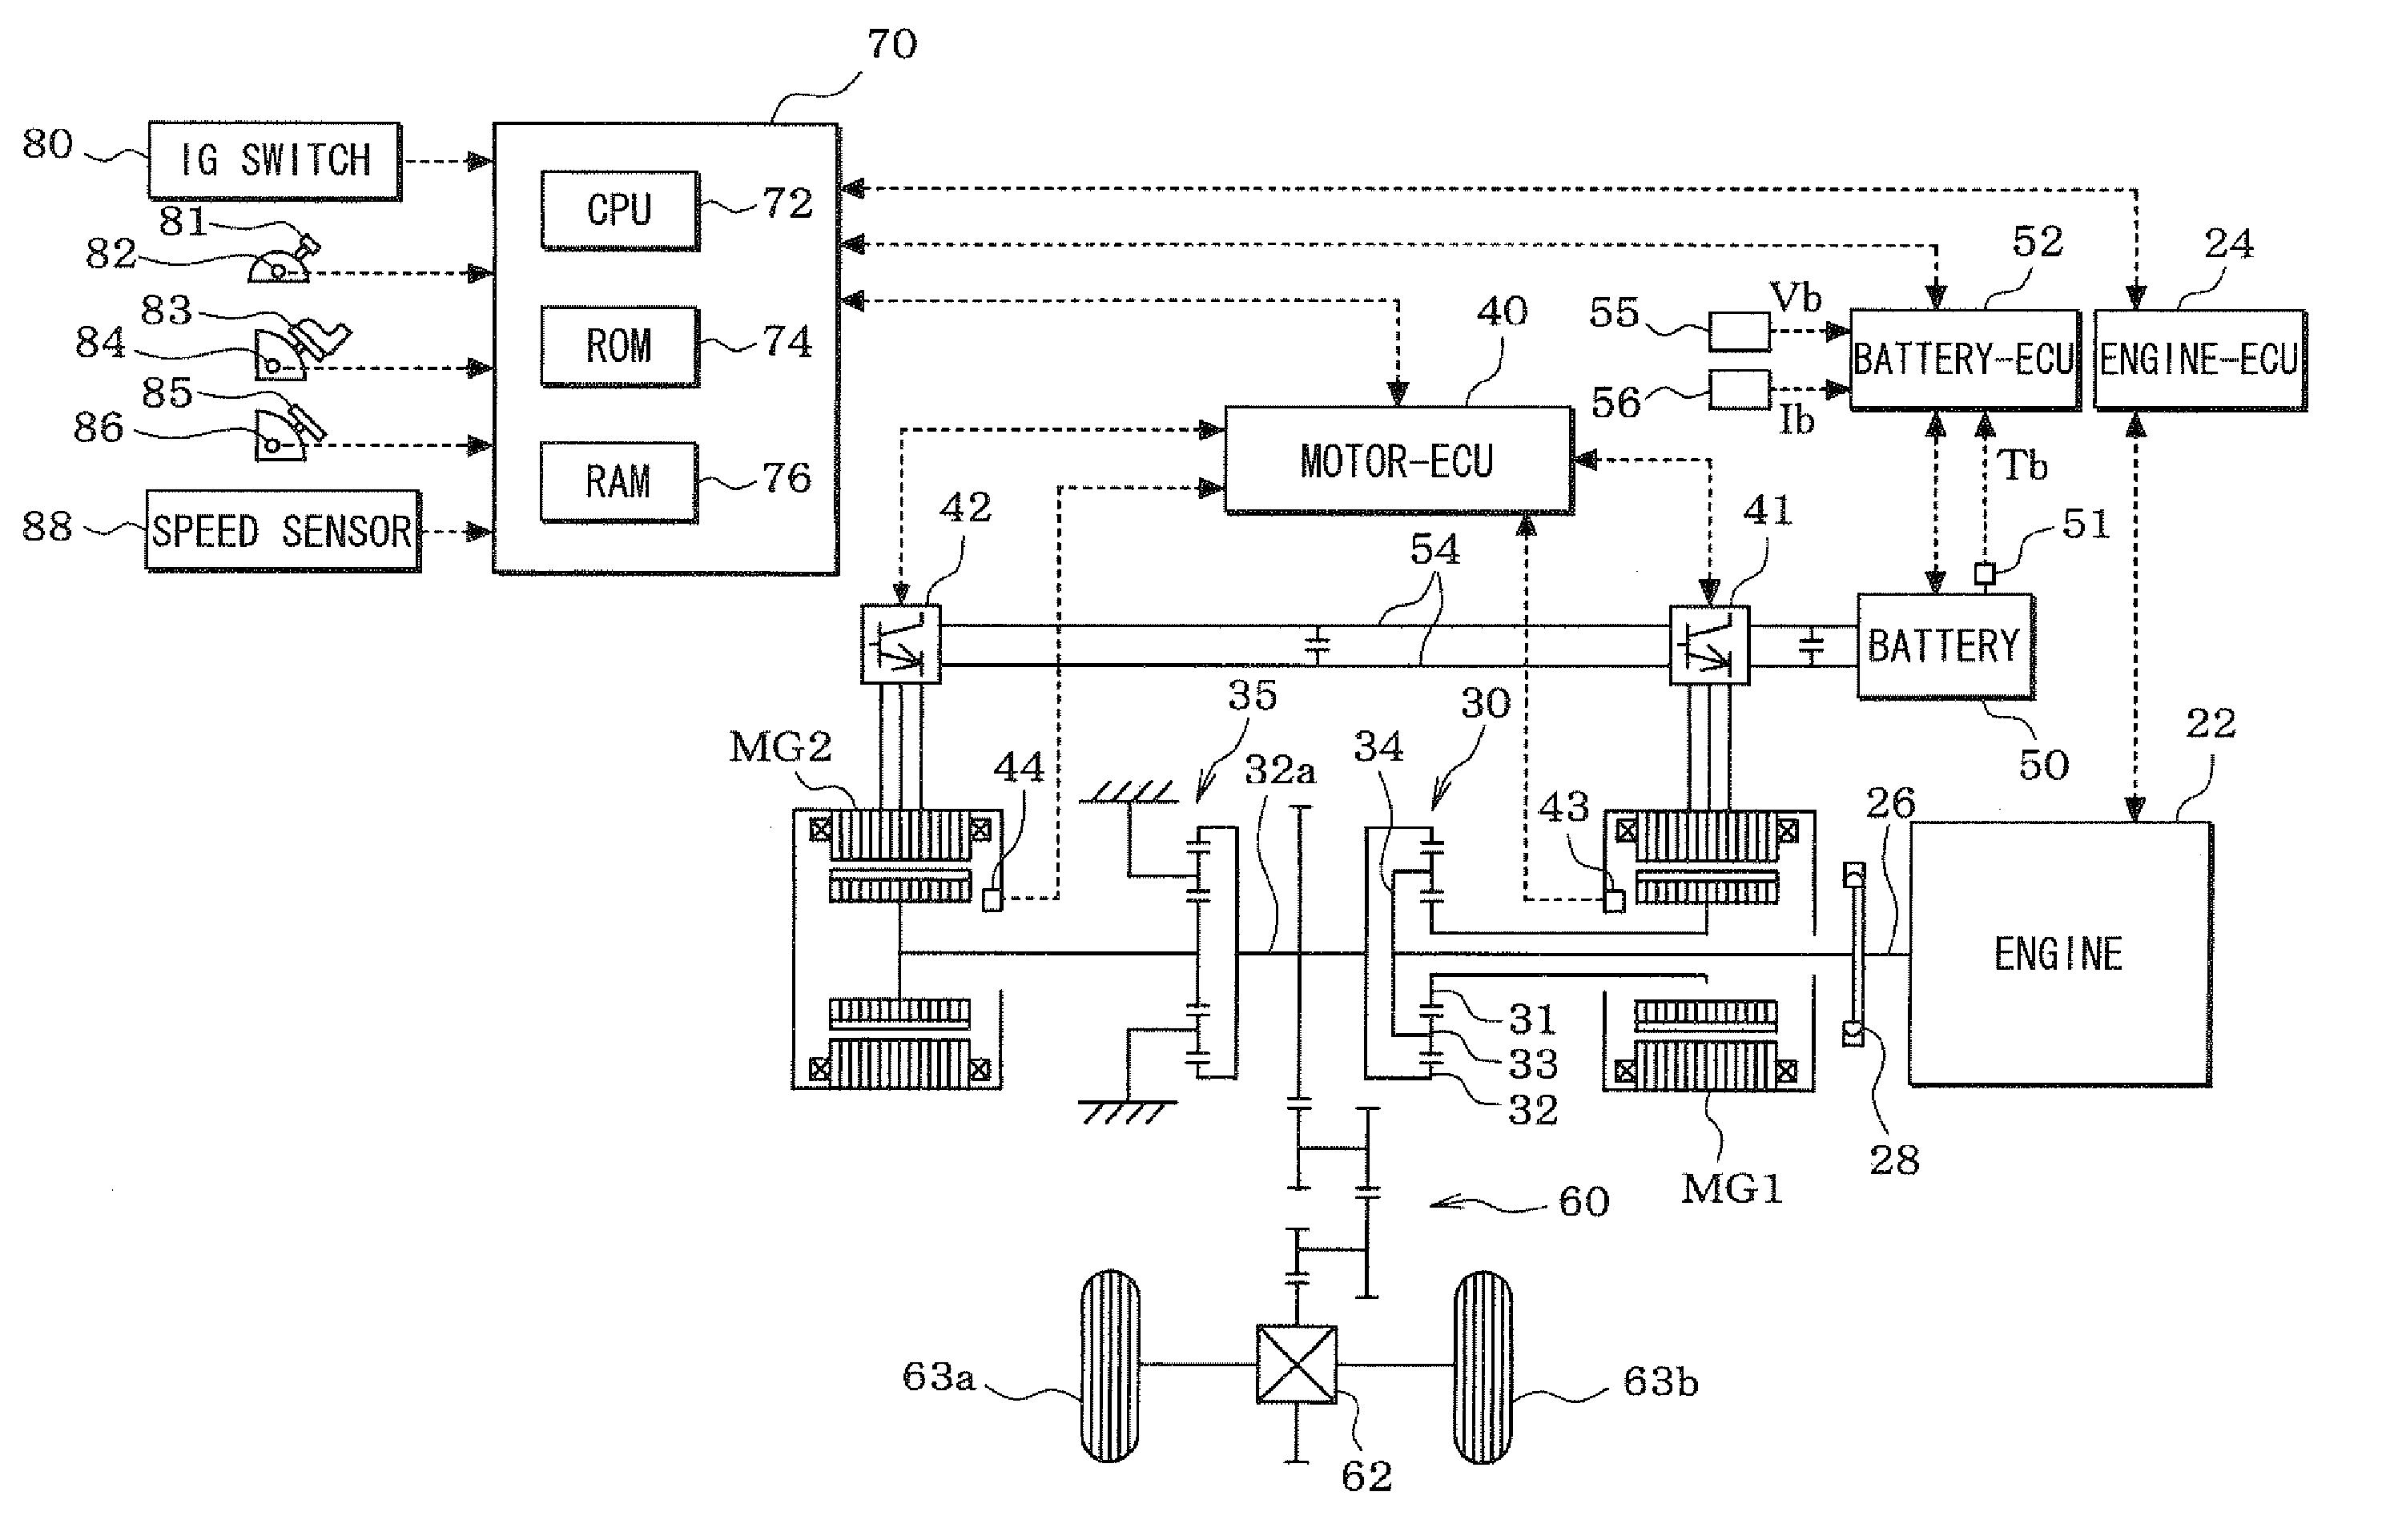 Power controller for hybrid vehicle